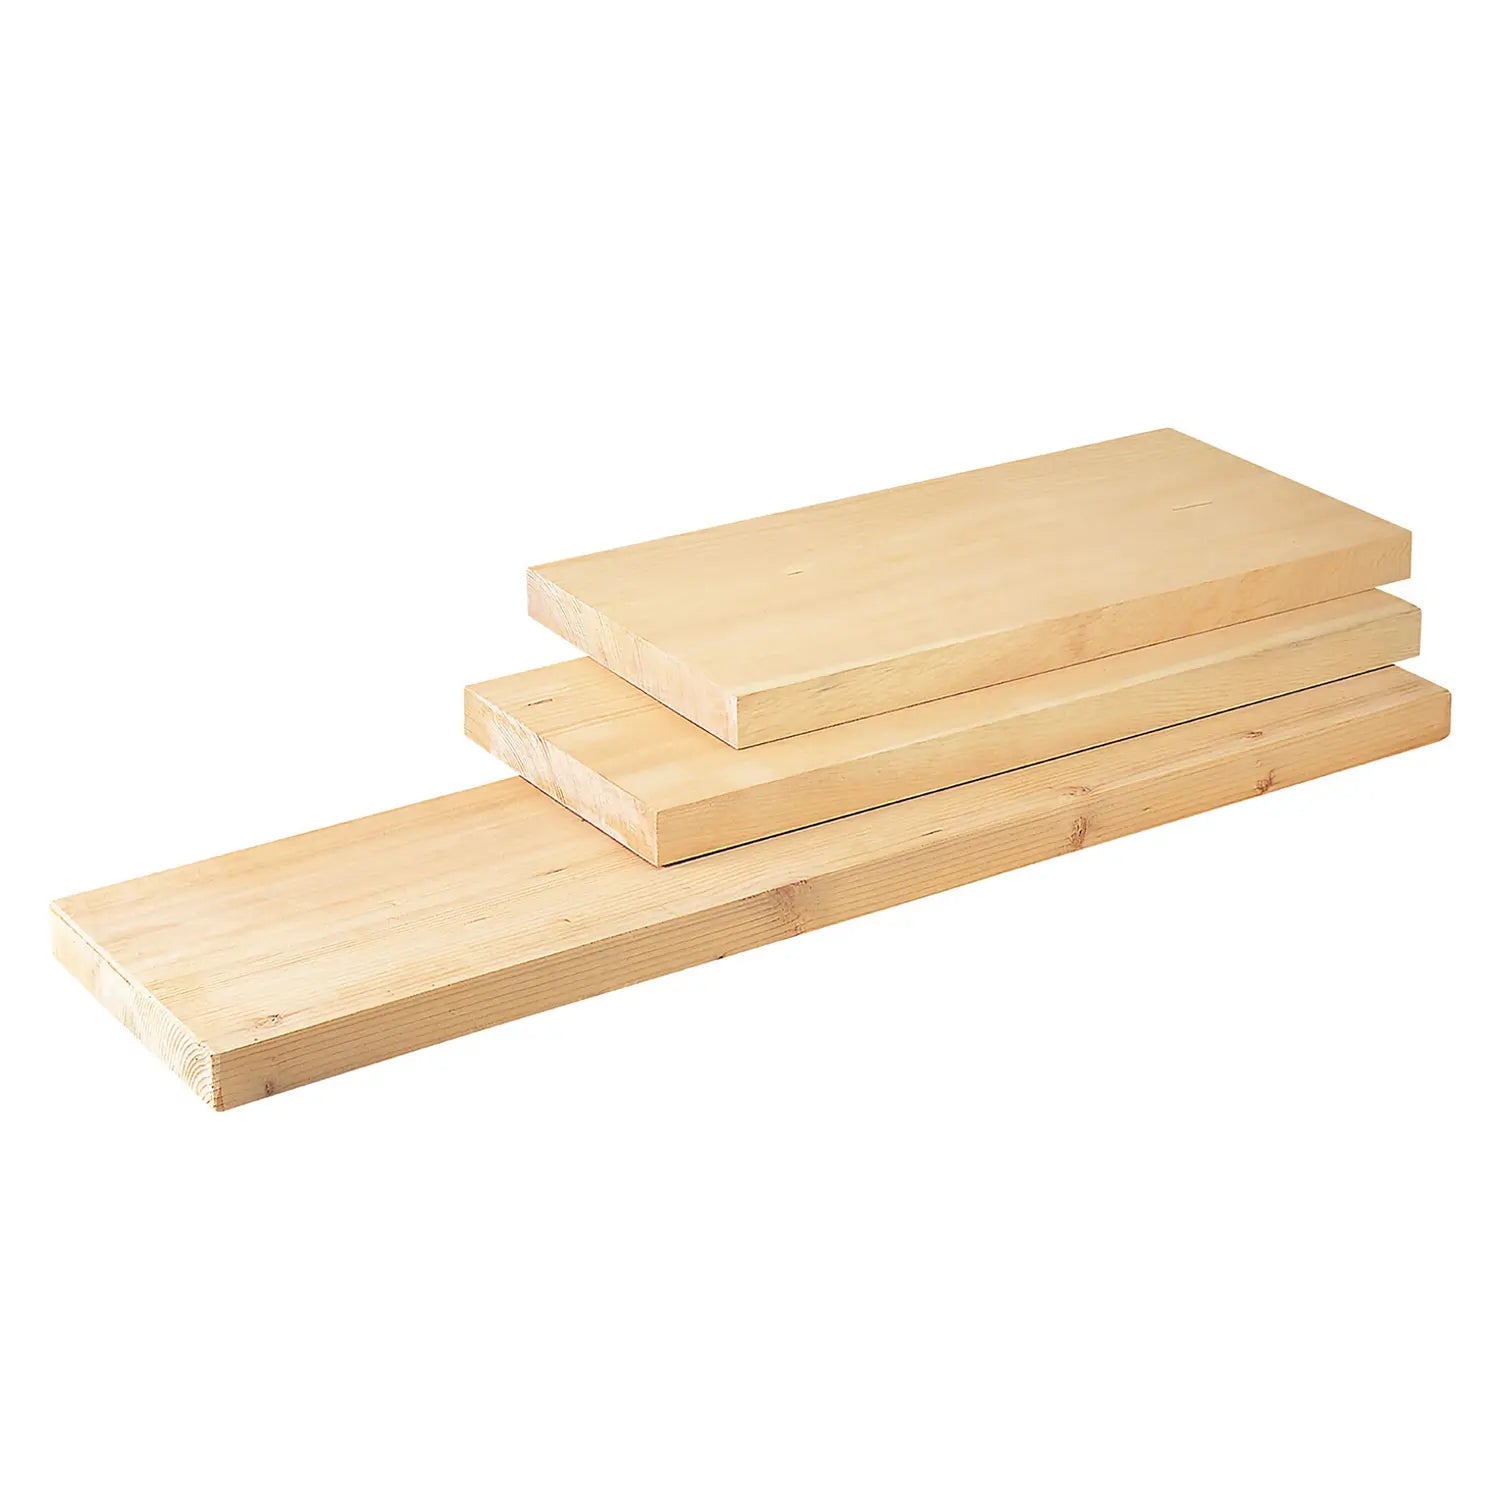 https://cdn.shopify.com/s/files/1/1610/3863/products/YamacohSinglePieceSpruceWoodenCuttingBoard05105_2_1600x.webp?v=1668735235